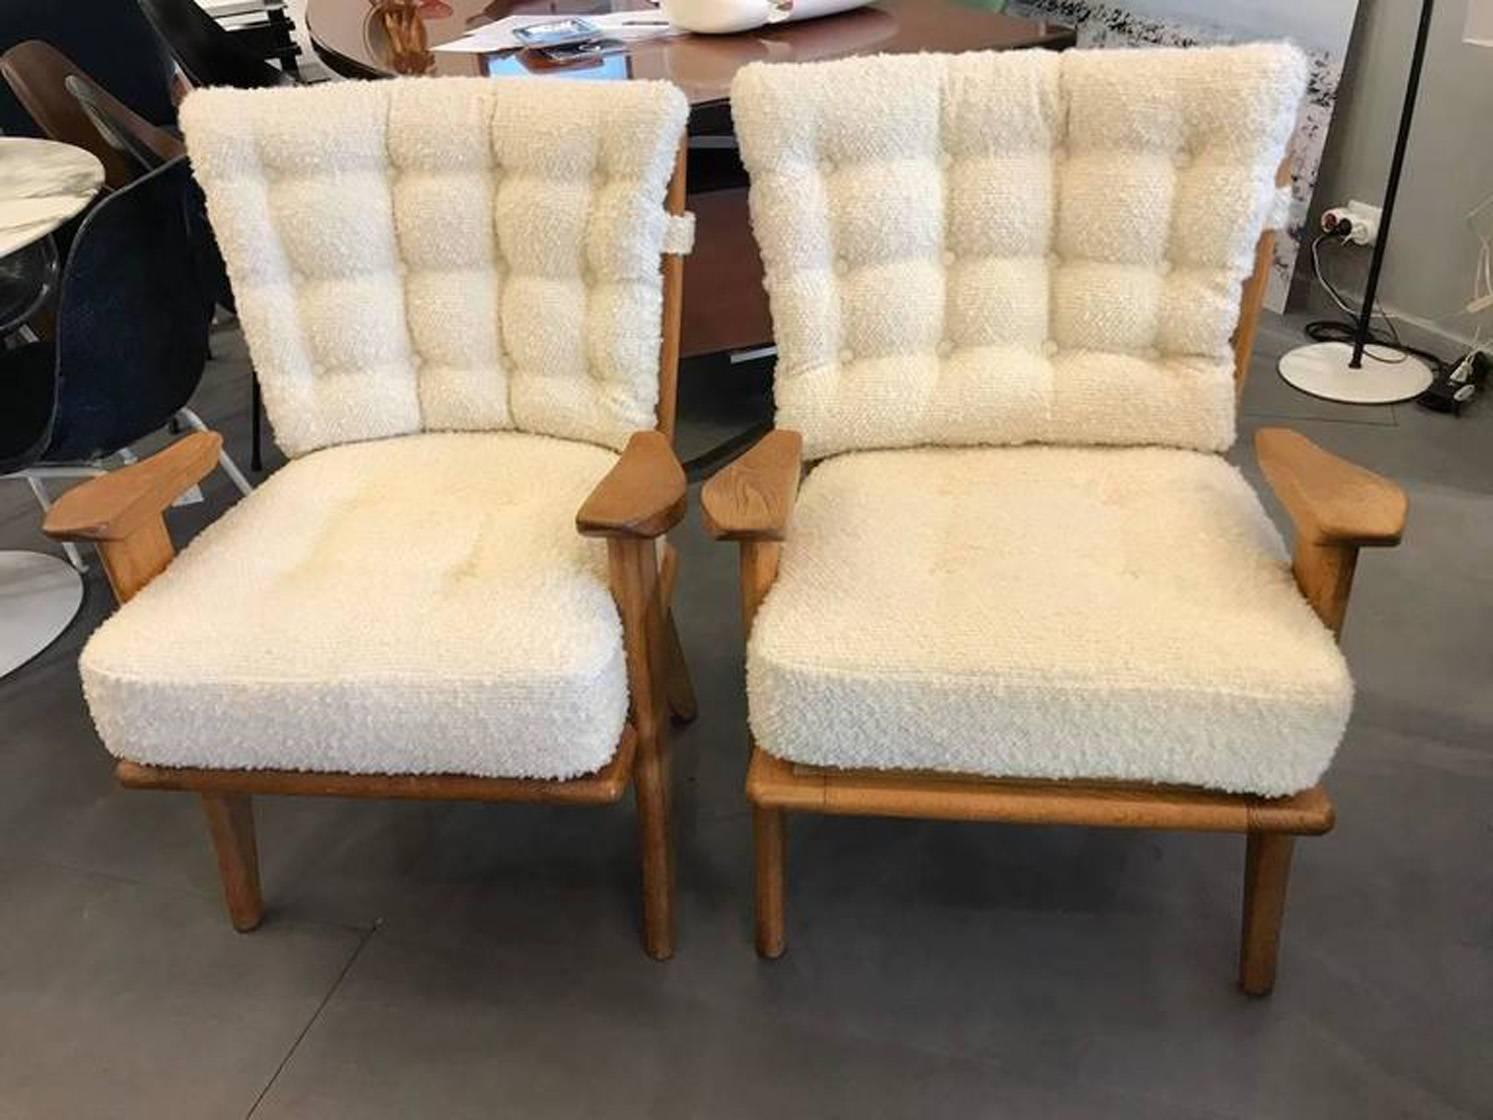 Perfect condition
Reupholstered in a white wool velvet fabric.